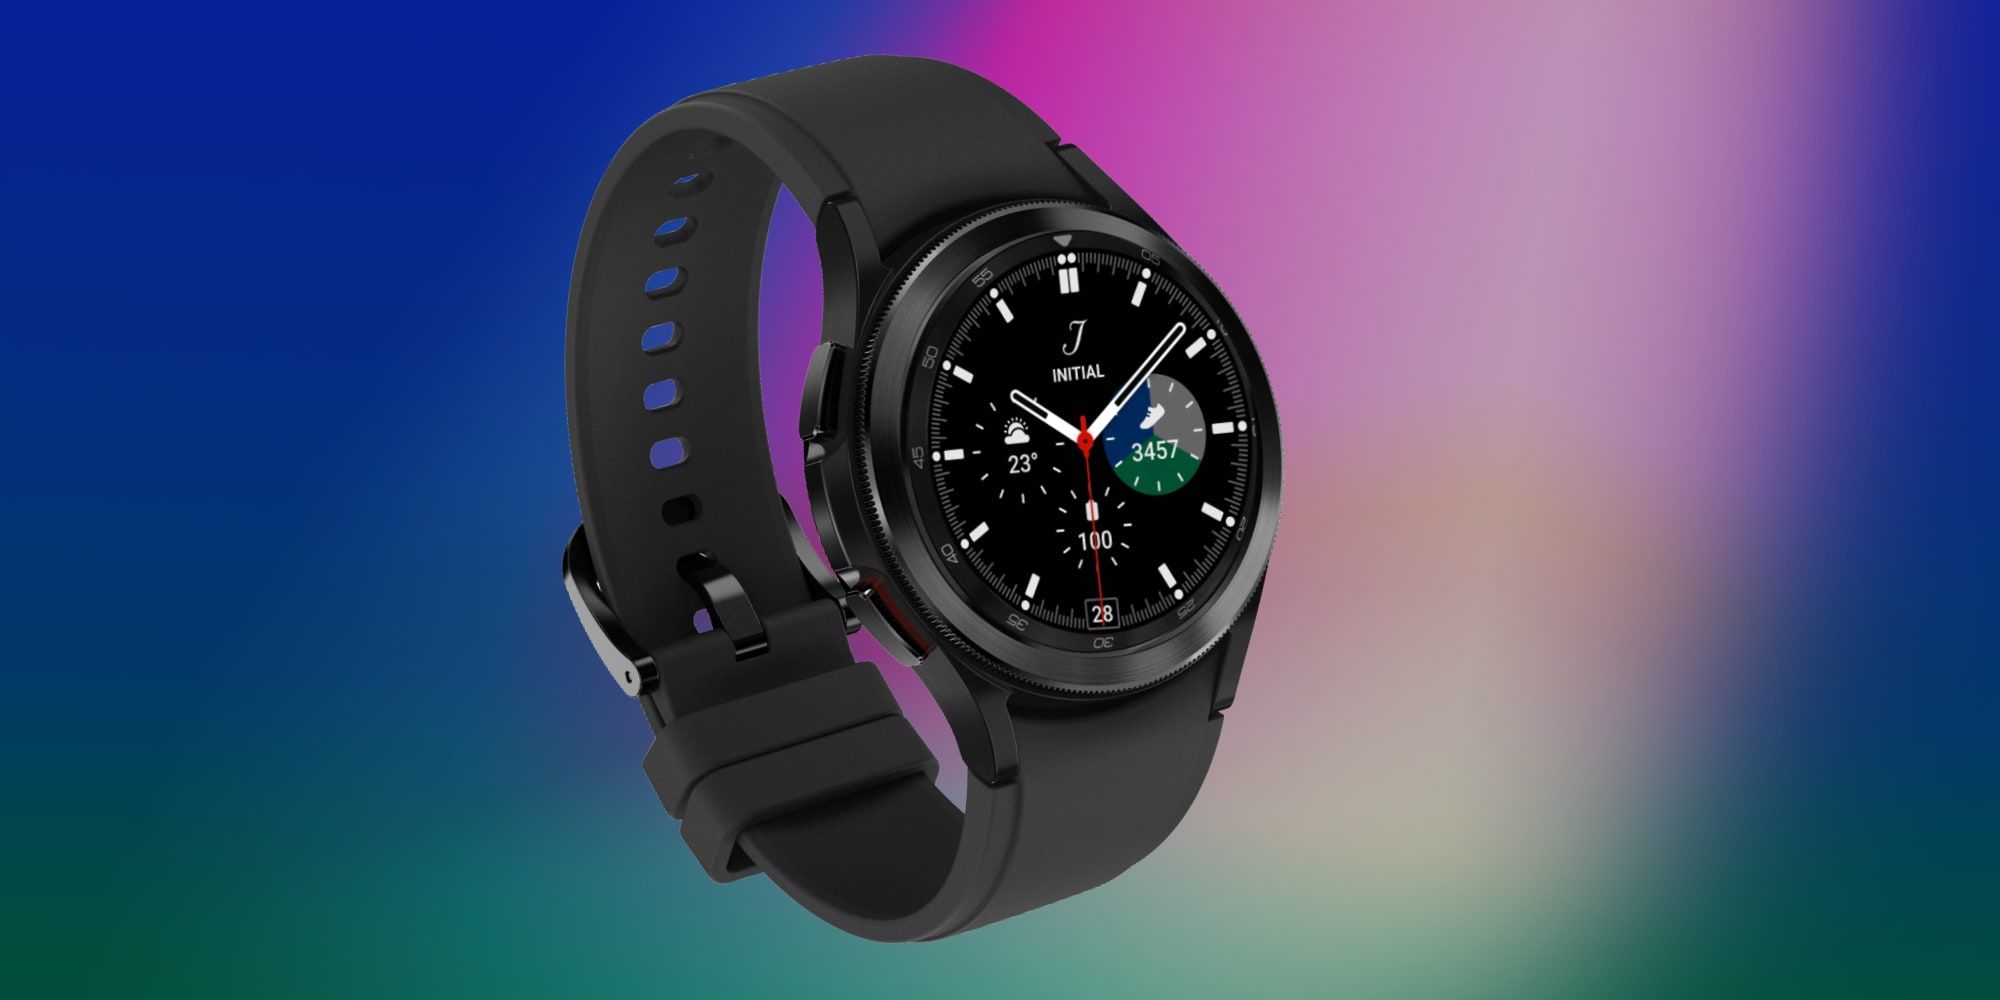 Samsung Galaxy Watch 4 Wear OS 3 Left-Handed Mode Buttons On Left